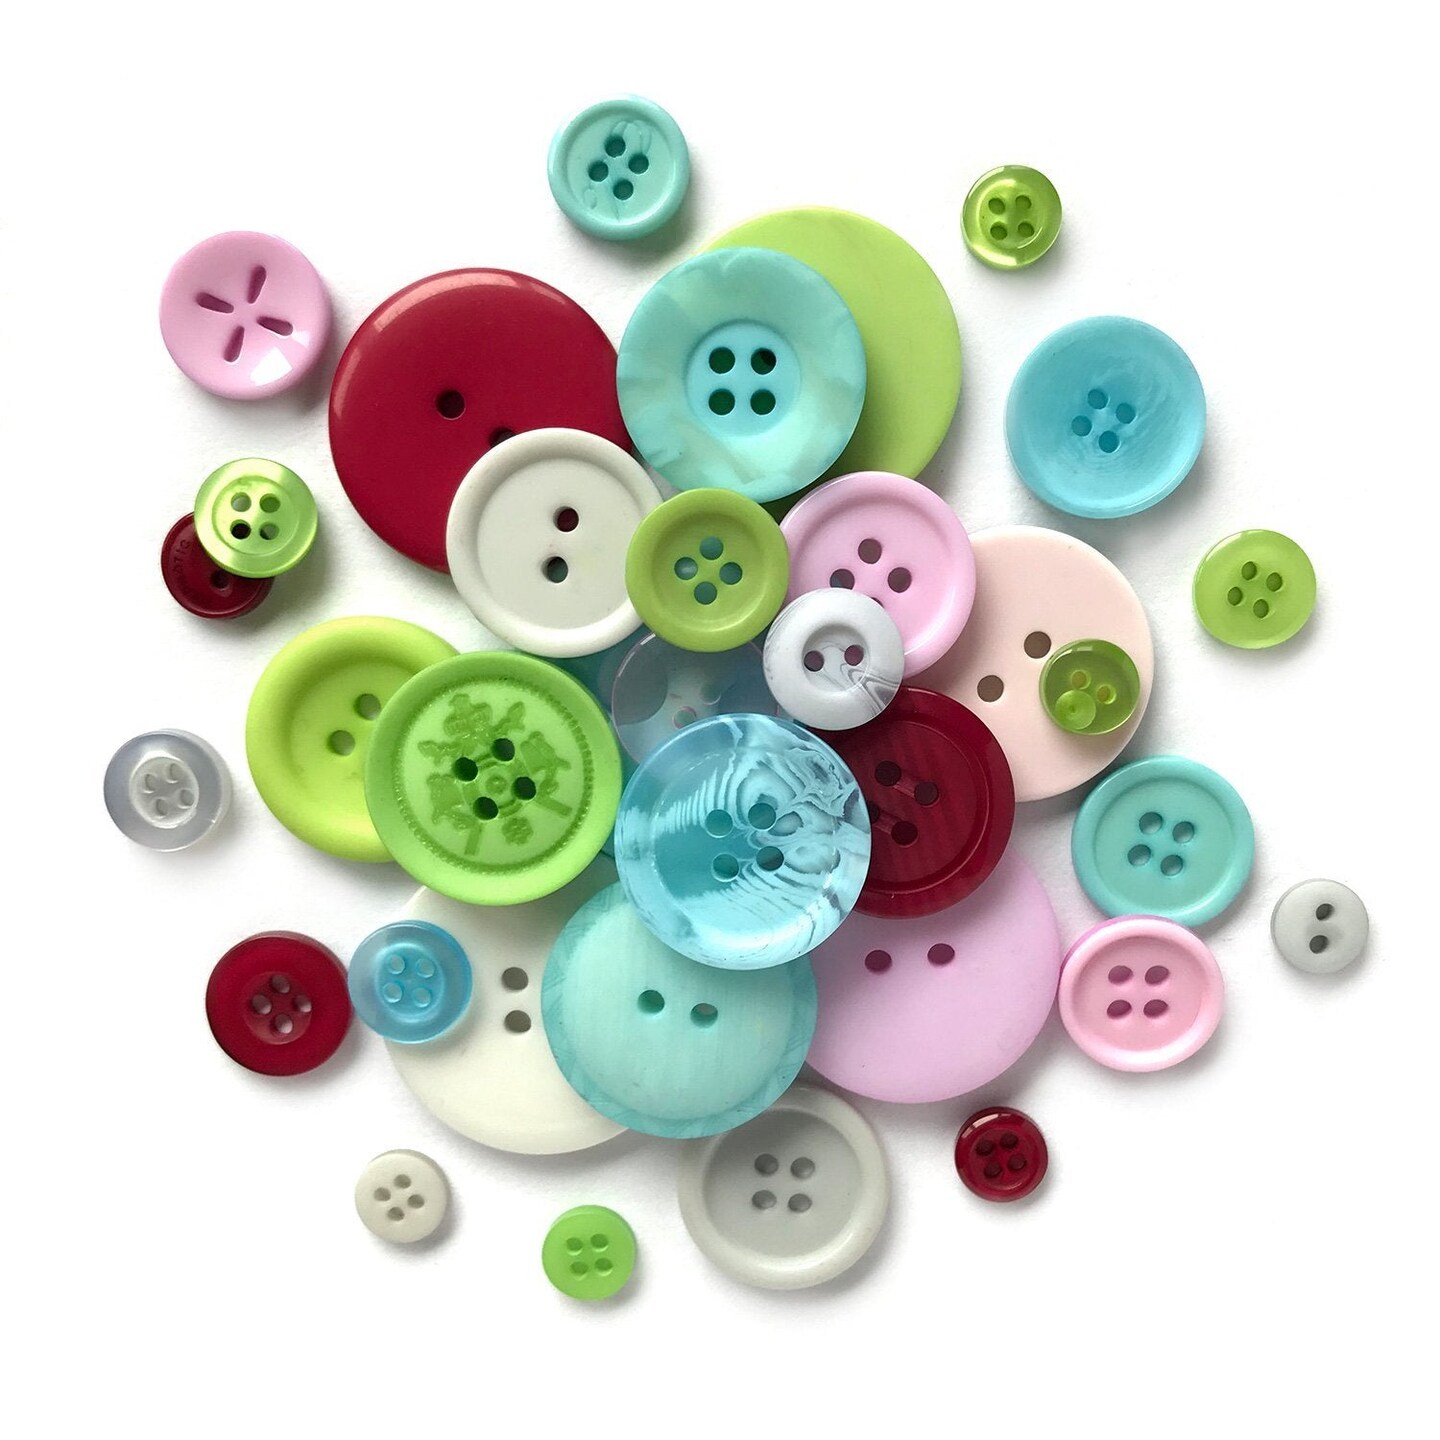 Bulk Buttons for Sewing and Button Crafts